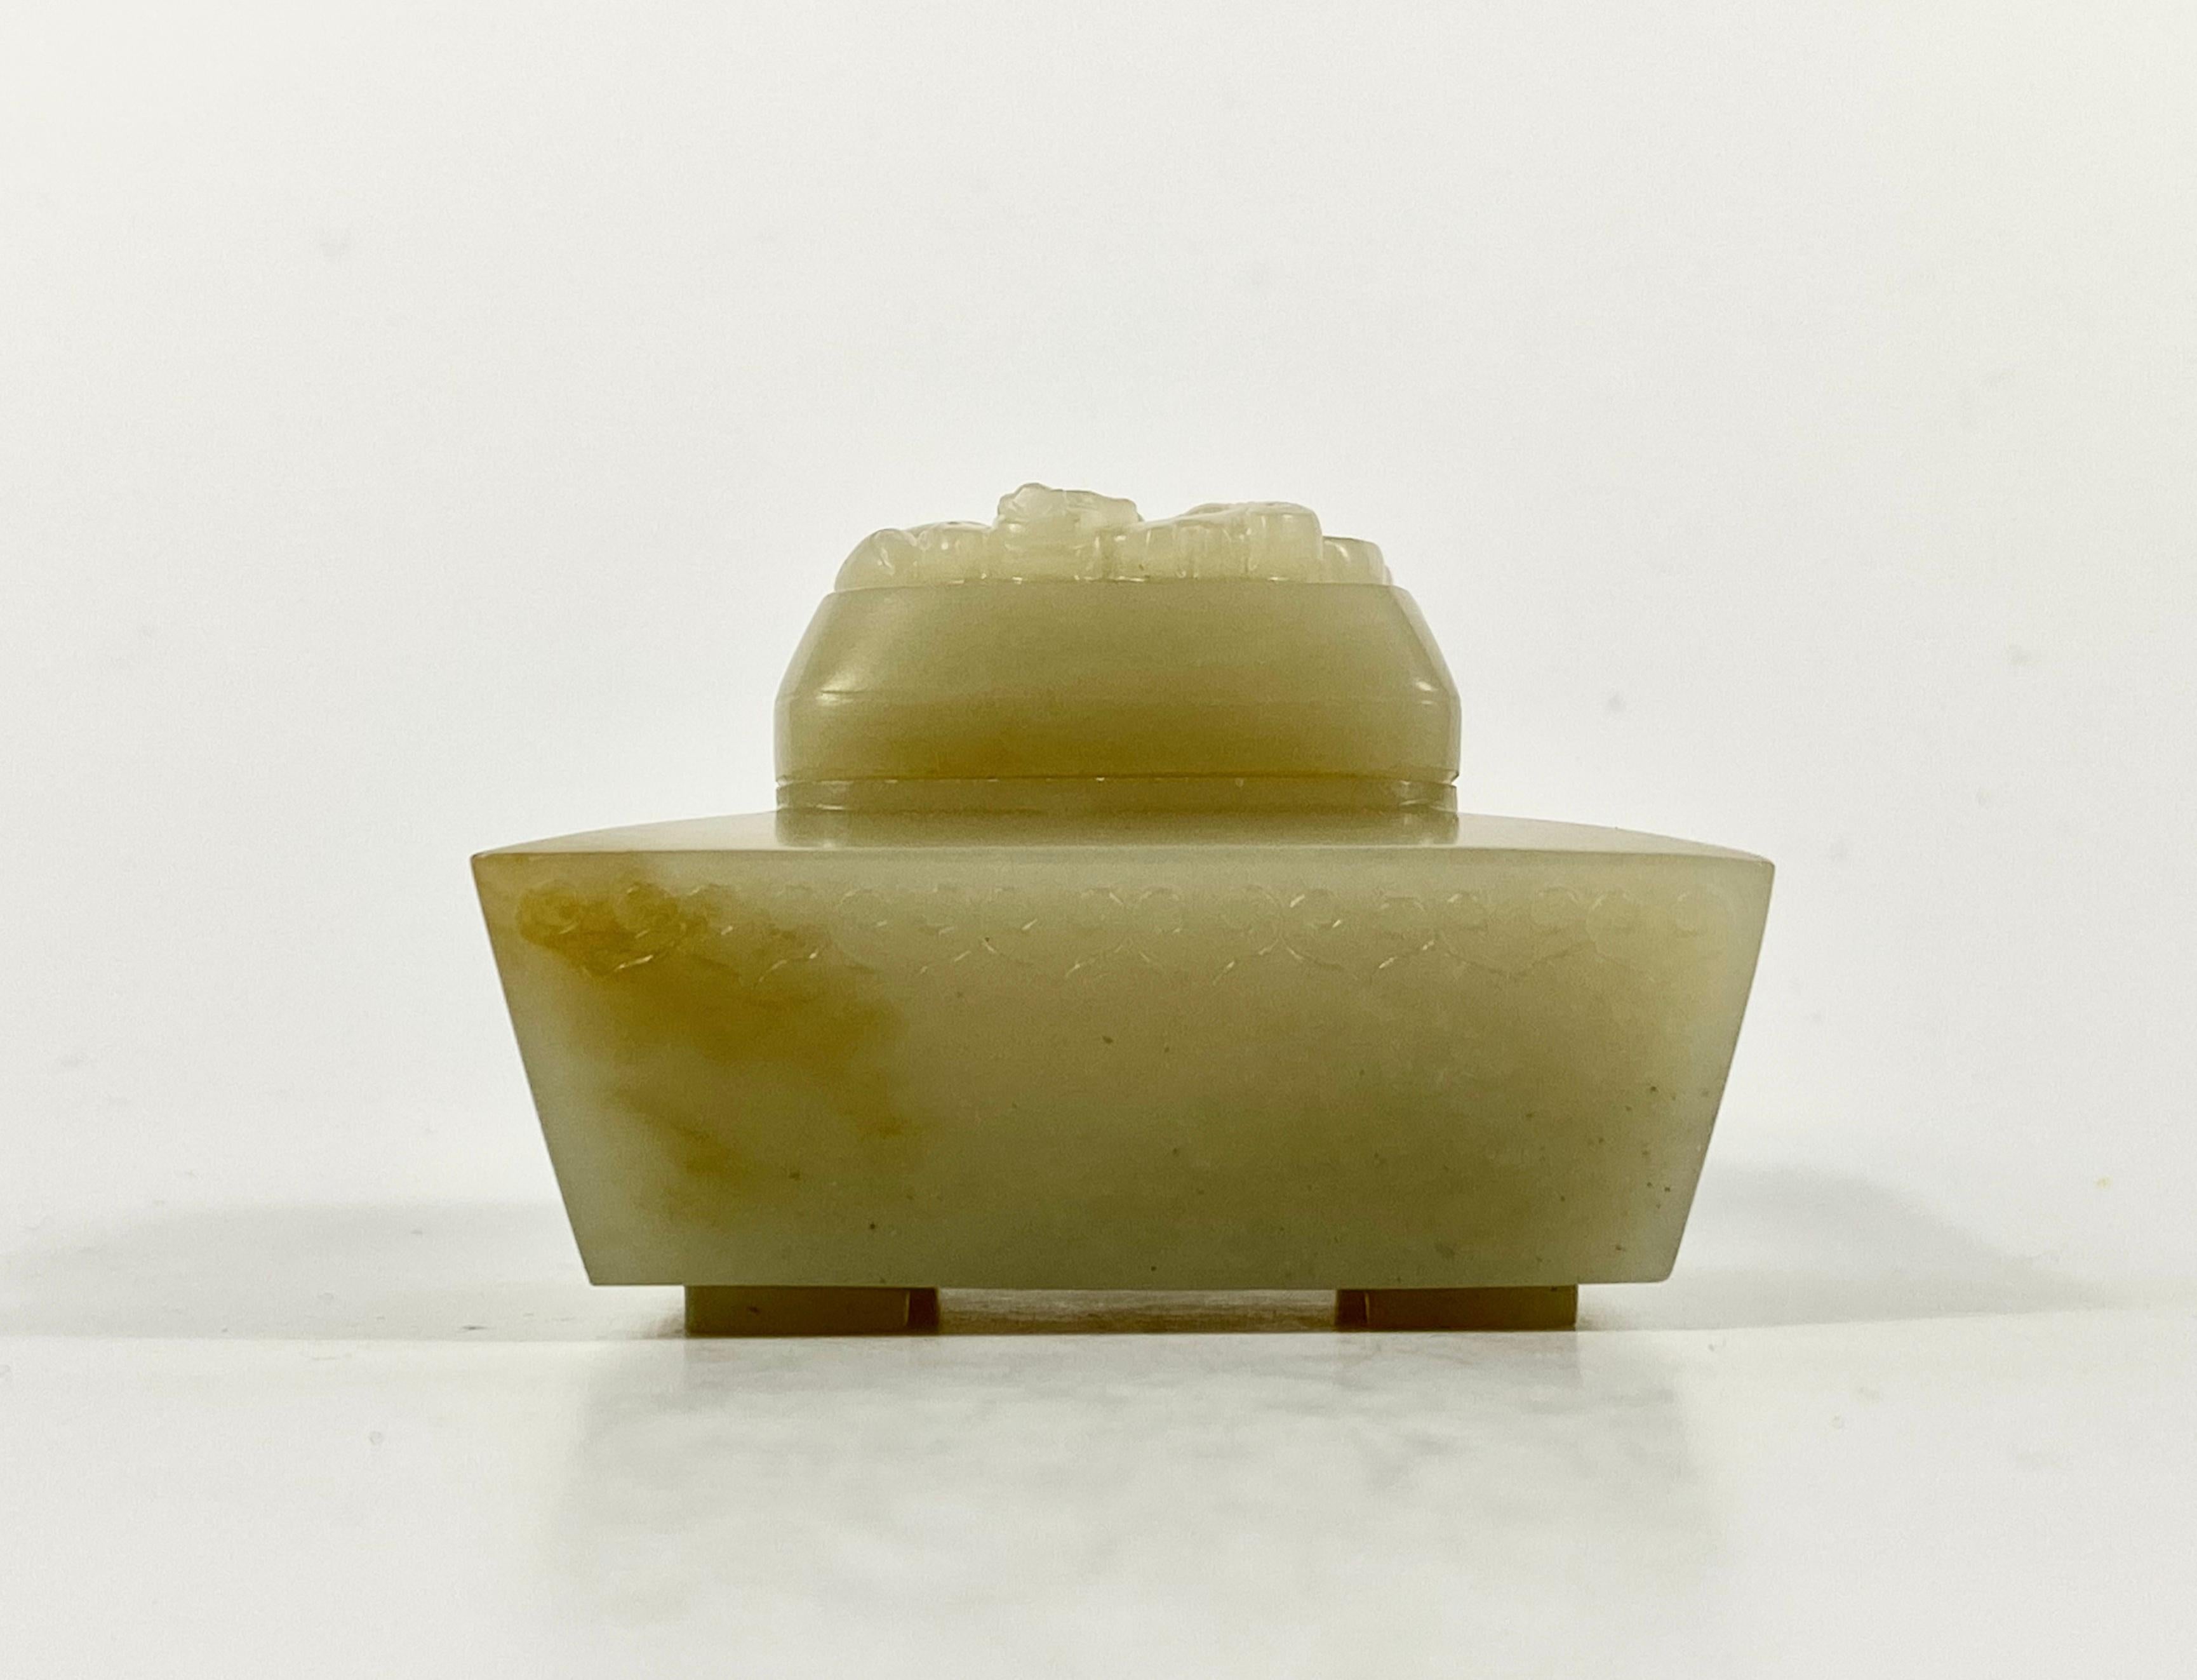 Chinese jade censer and cover, 19th century, Qing dynasty. The small square shaped base, carved with a stylised Ruyi head motif to the rim, and set upon four angled feet.
The square cover, deeply carved to the top with a coiled